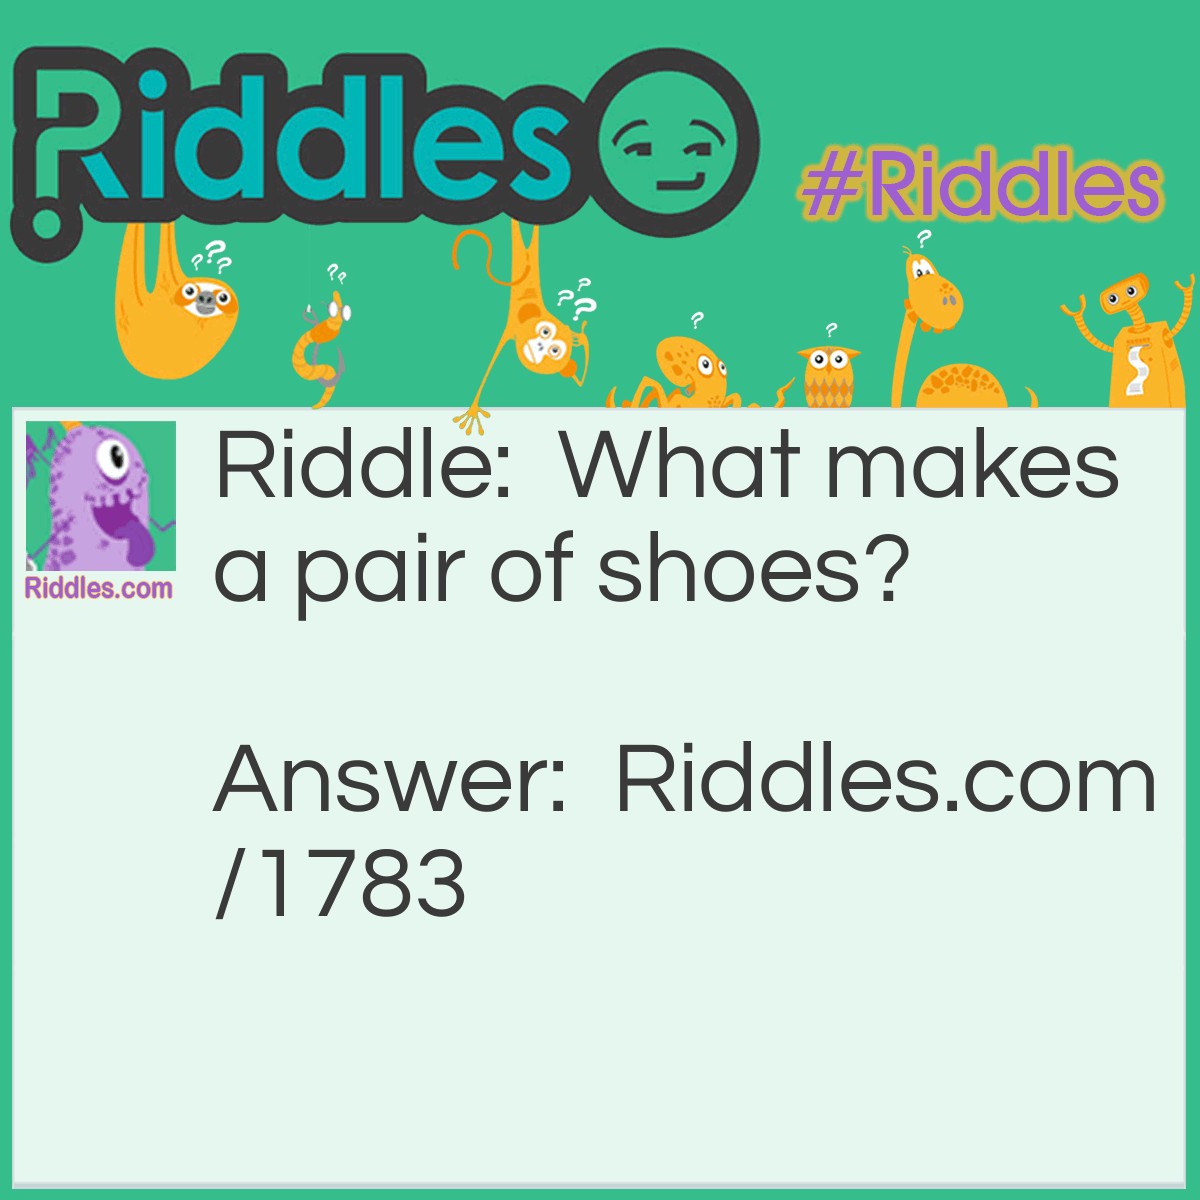 Riddle: What makes a pair of shoes? Answer: Two shoes.